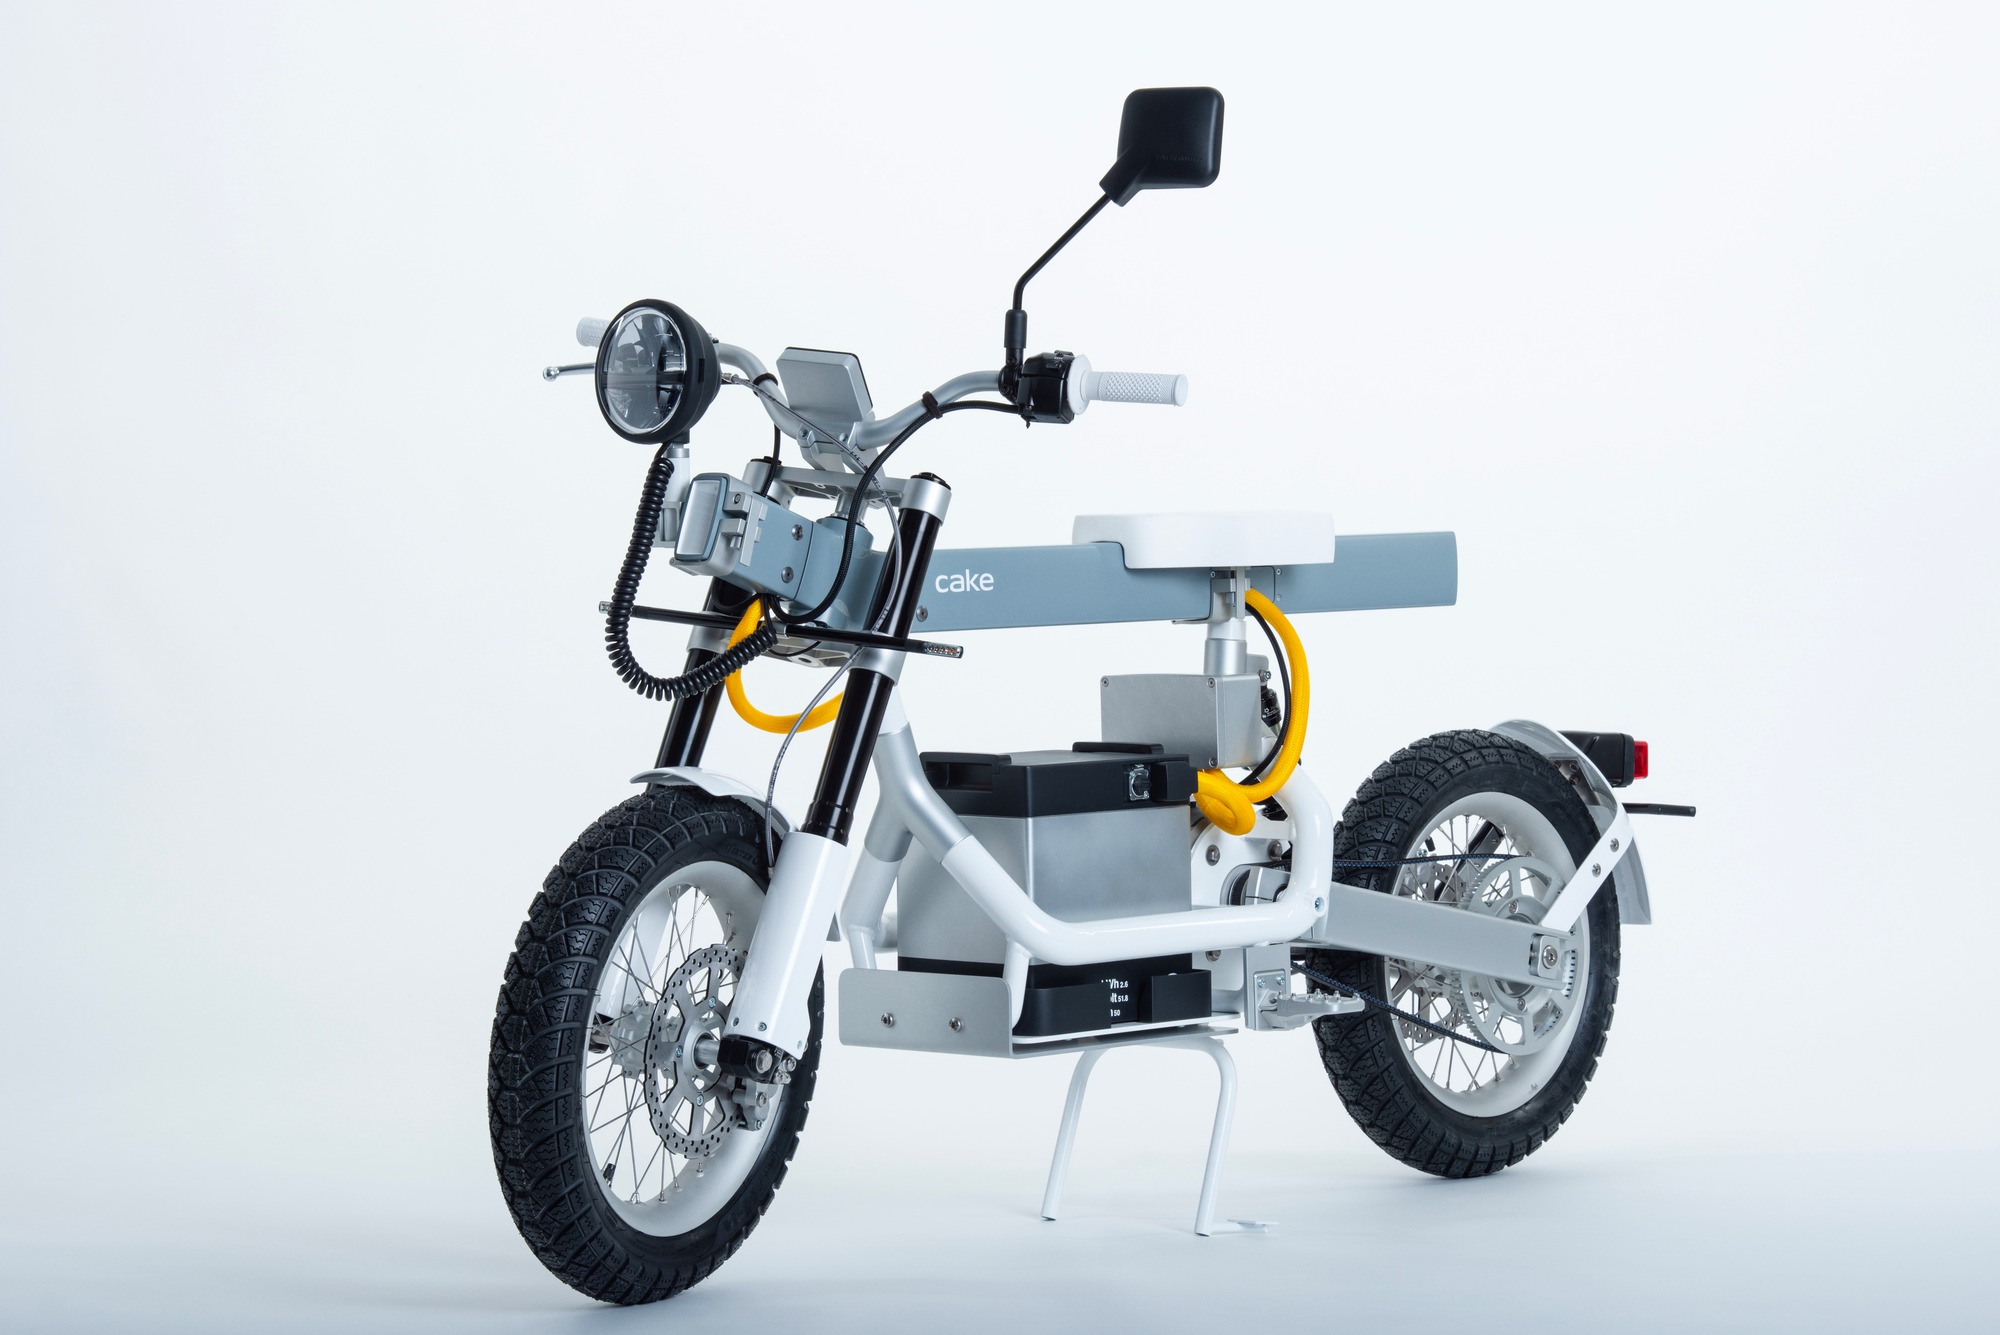 Polestar and Cake extend their partnership to include a new electric moped  - The Verge